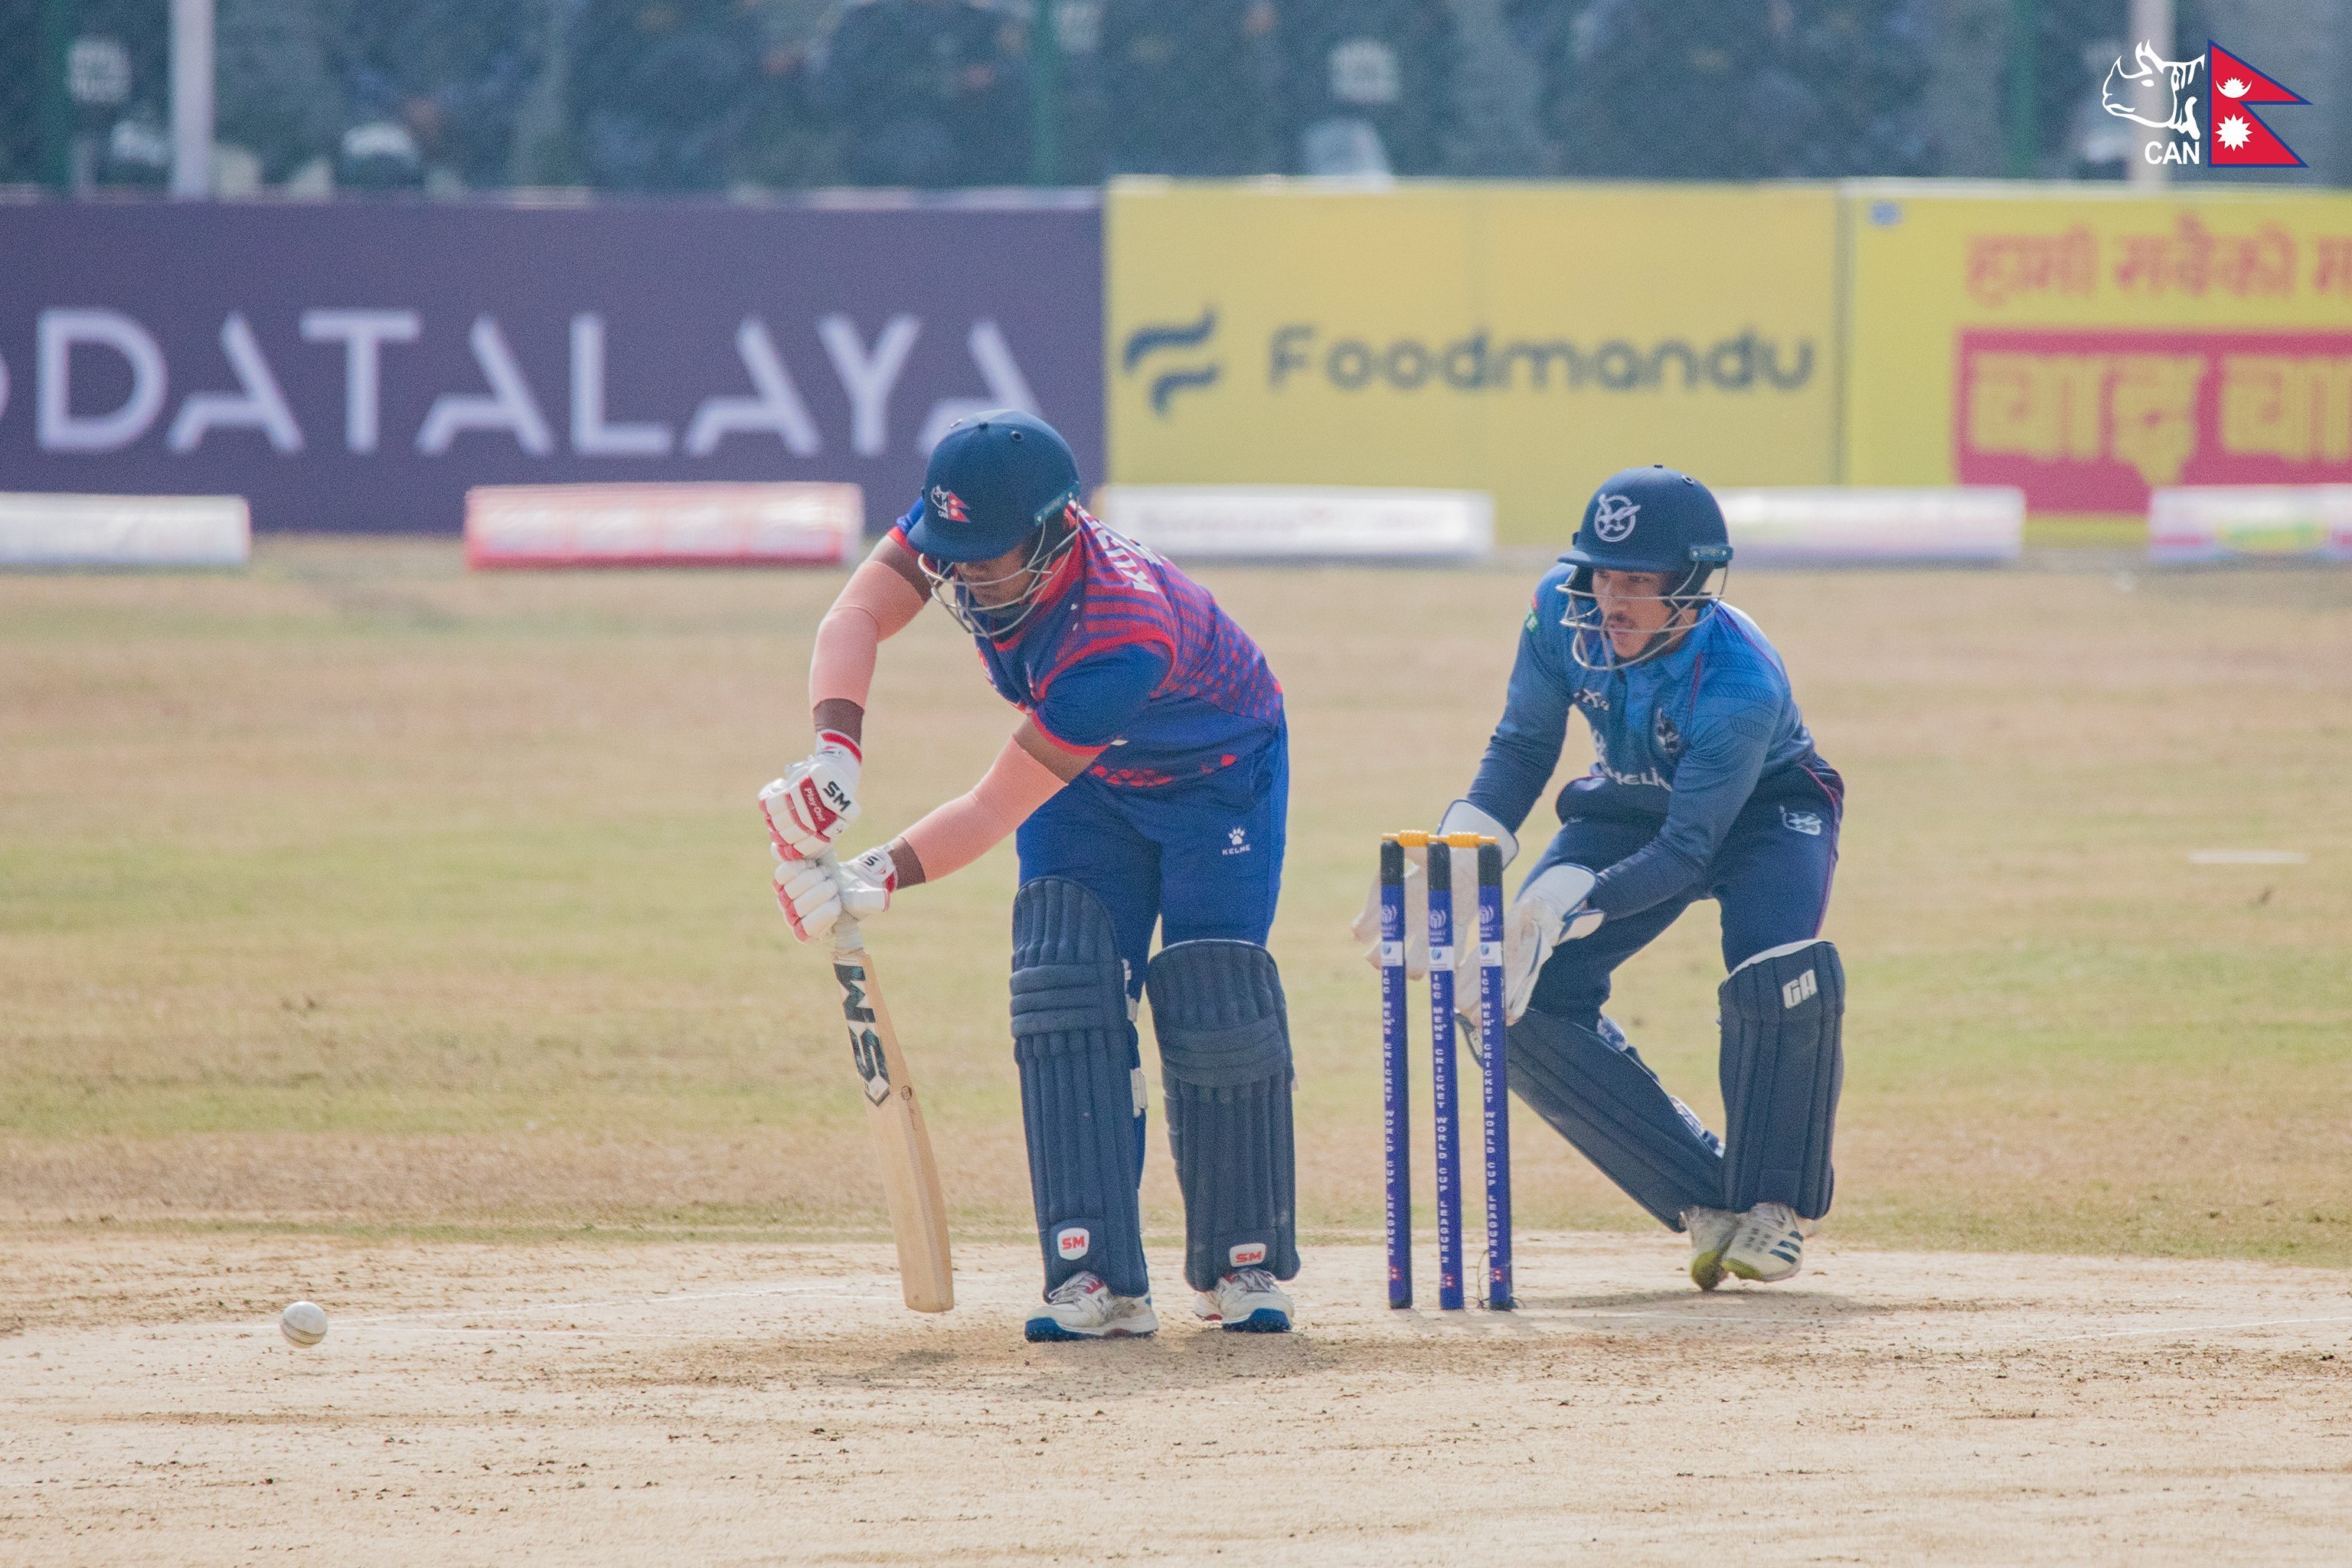 Nepal Fights an Uphill Battle: Early struggles see three wickets tumble in powerplay